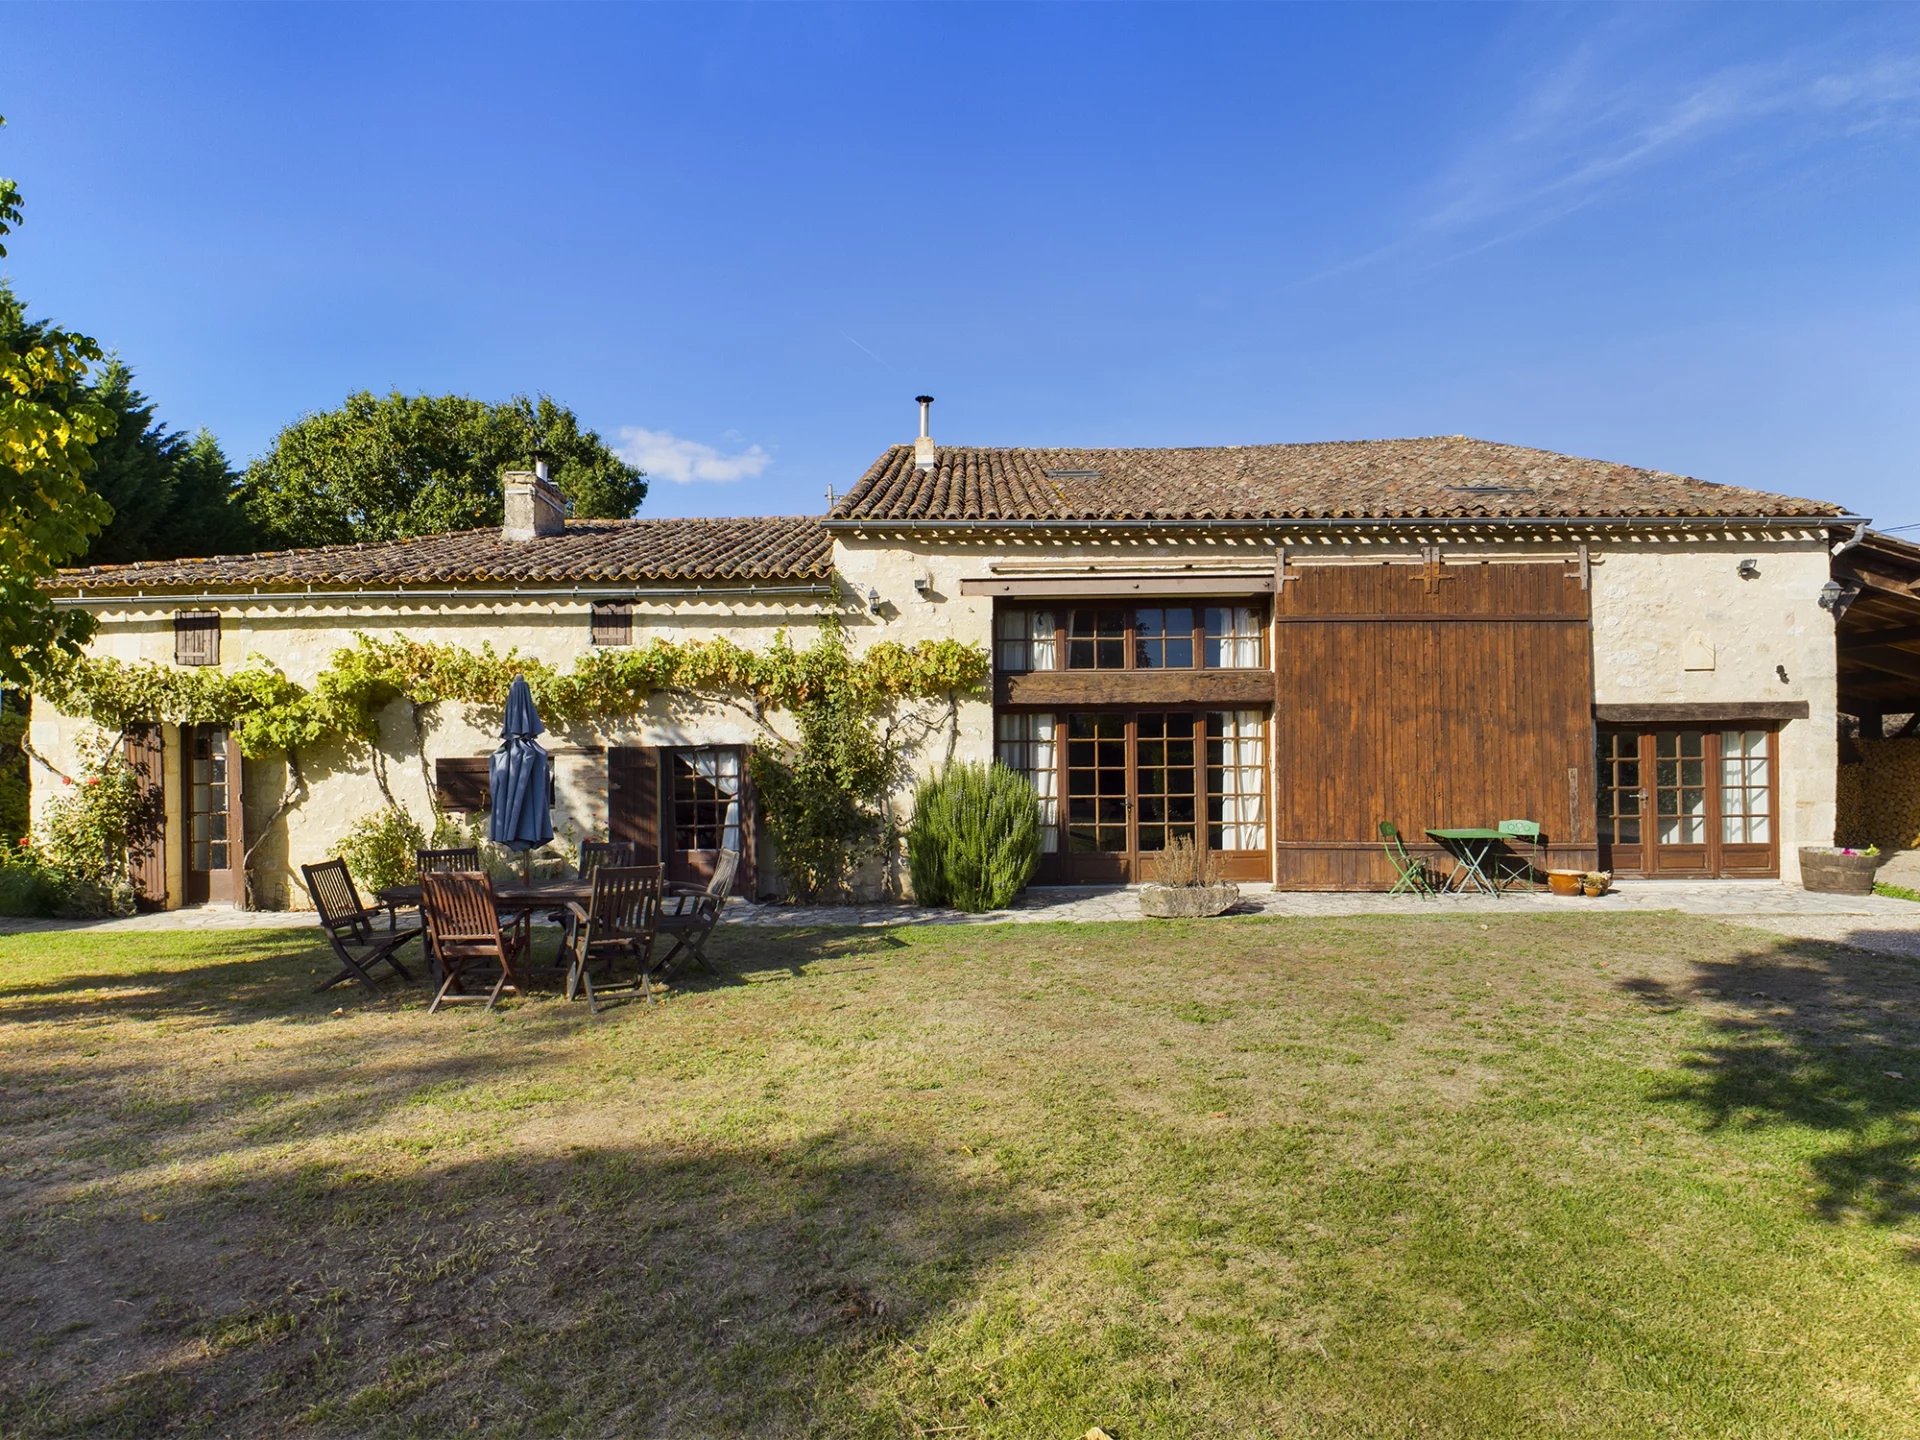 Beautiful 5 bedroom stone property with 2 cottages and pool, just 1 hour from Bordeaux, near St Emilion and Bergerac.